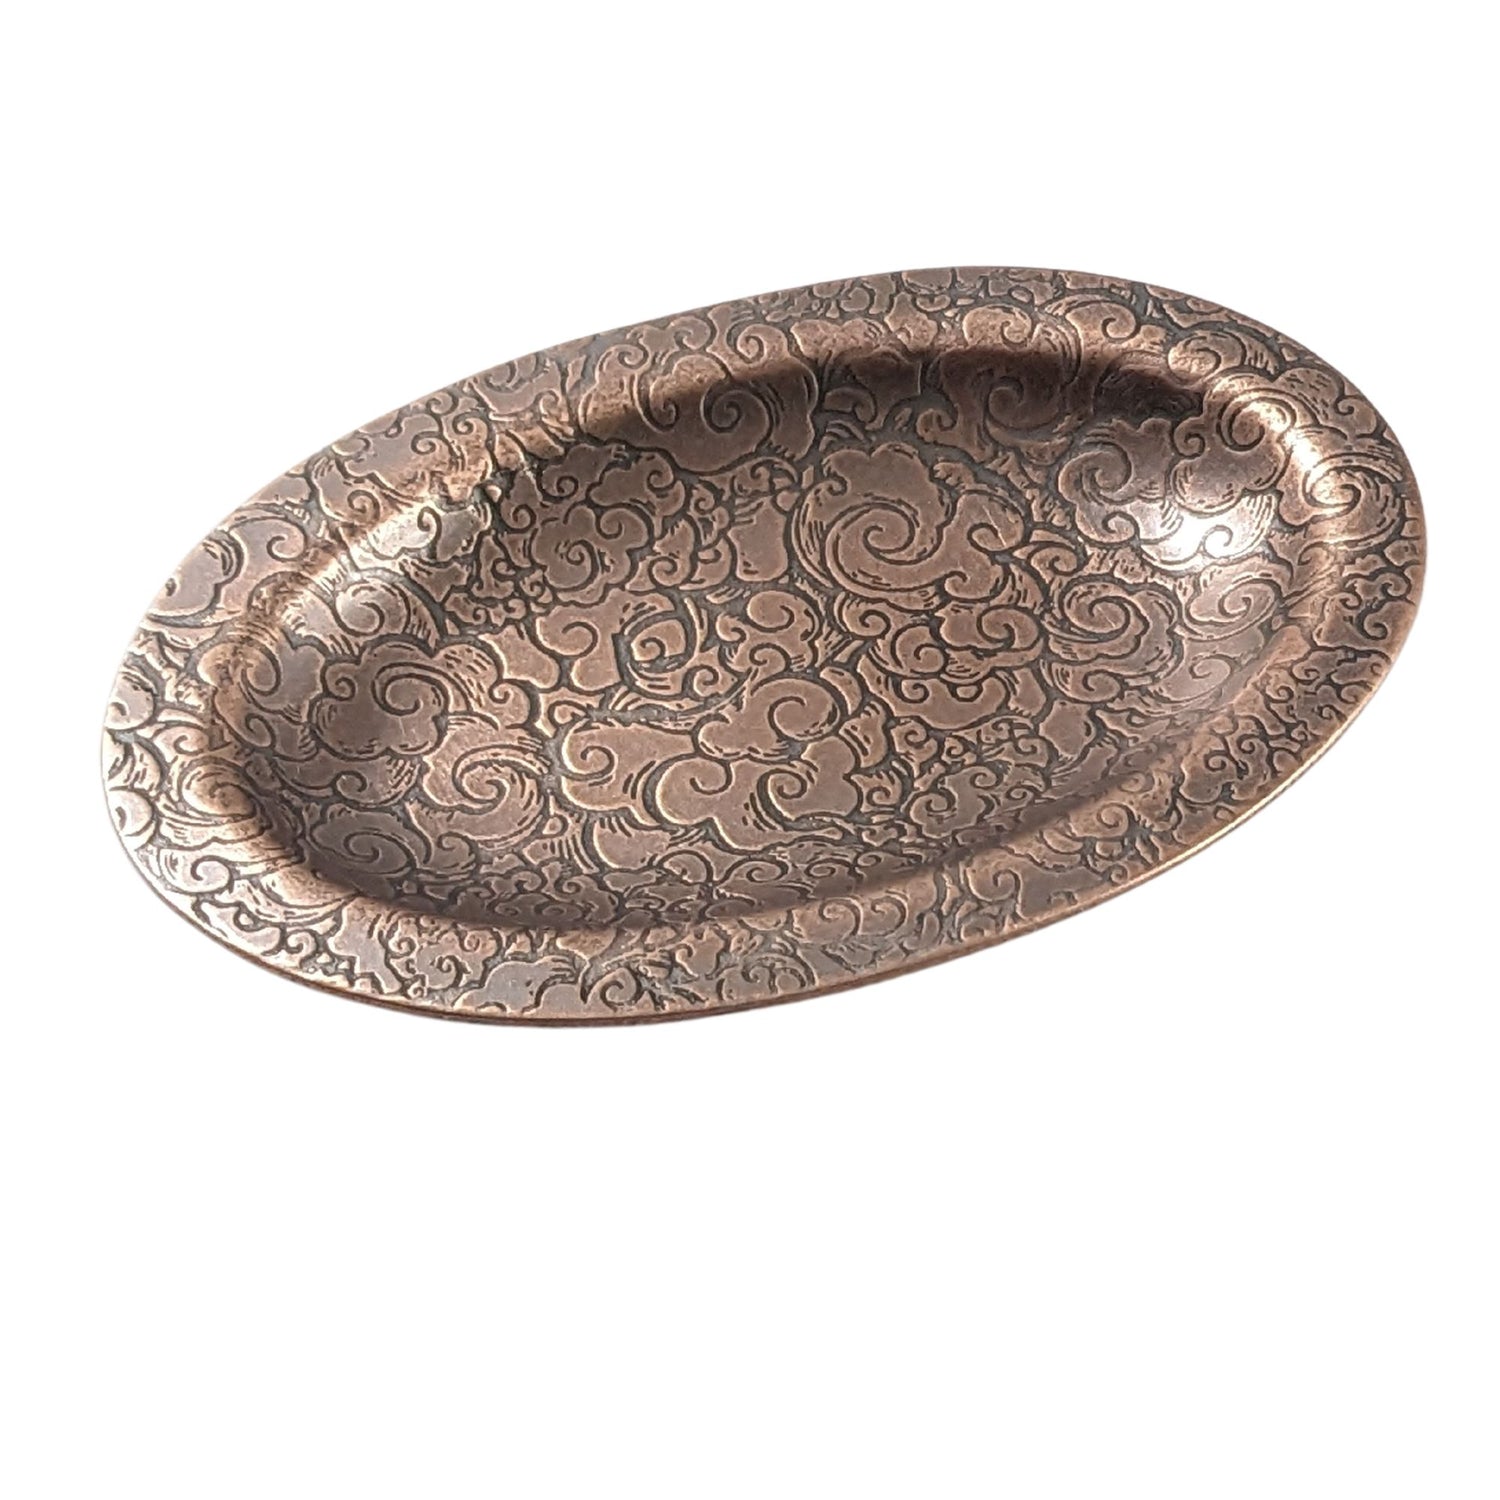 An oval copper ring dish with a raised edge. The dish has an impressed pattern of clouds.